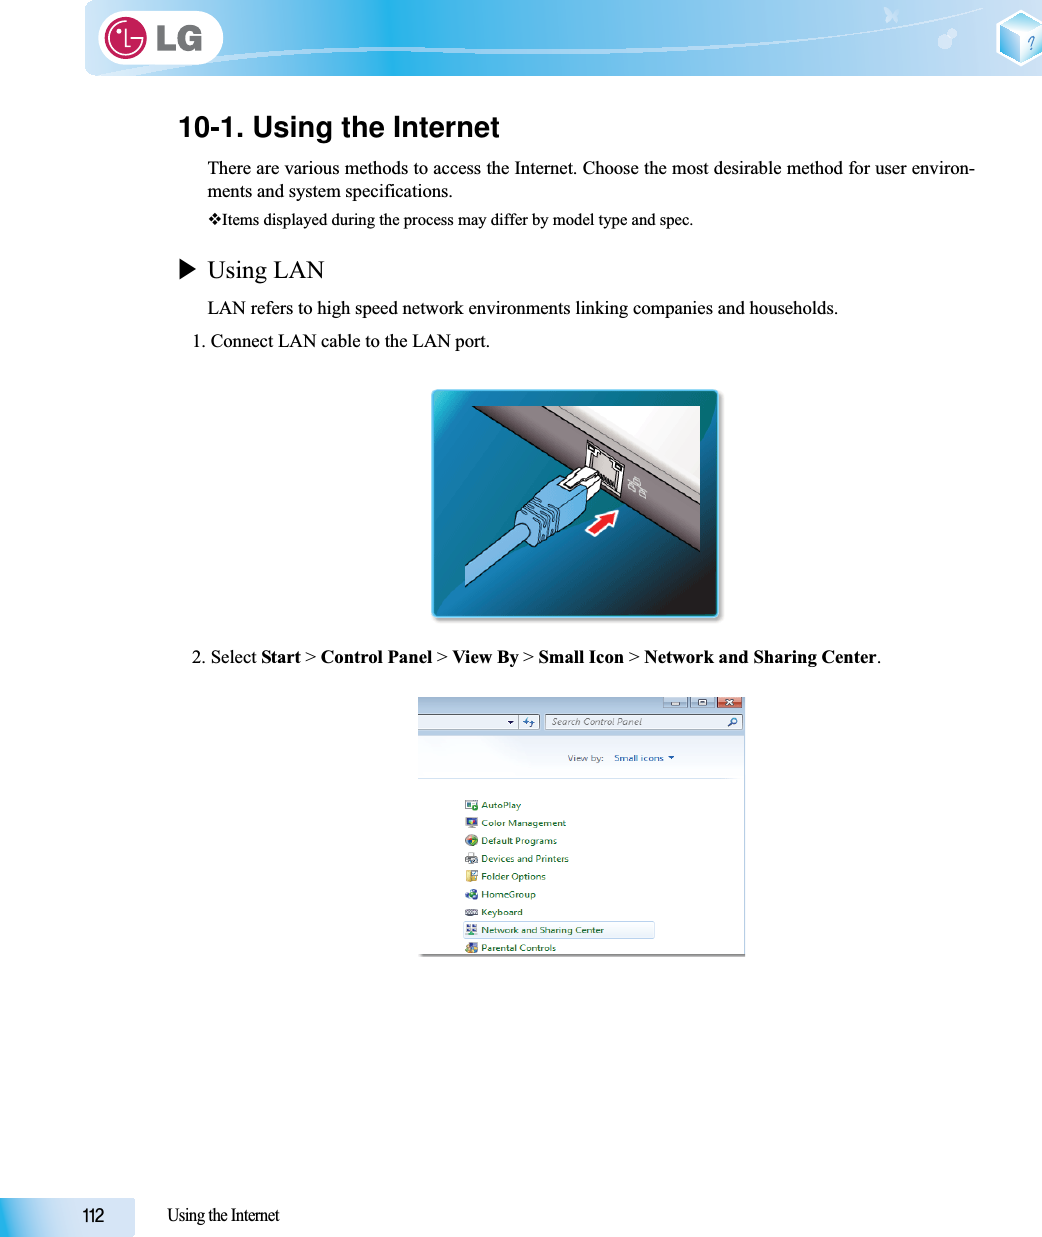 Using the Internet10-1. Using the InternetThere are various methods to access the Internet. Choose the most desirable method for user environ-ments and system specifications.Items displayed during the process may differ by model type and spec.XUsing LANLAN refers to high speed network environments linking companies and households.1. Connect LAN cable to the LAN port.2. Select Start &gt; Control Panel &gt; View By &gt; Small Icon &gt; Network and Sharing Center.